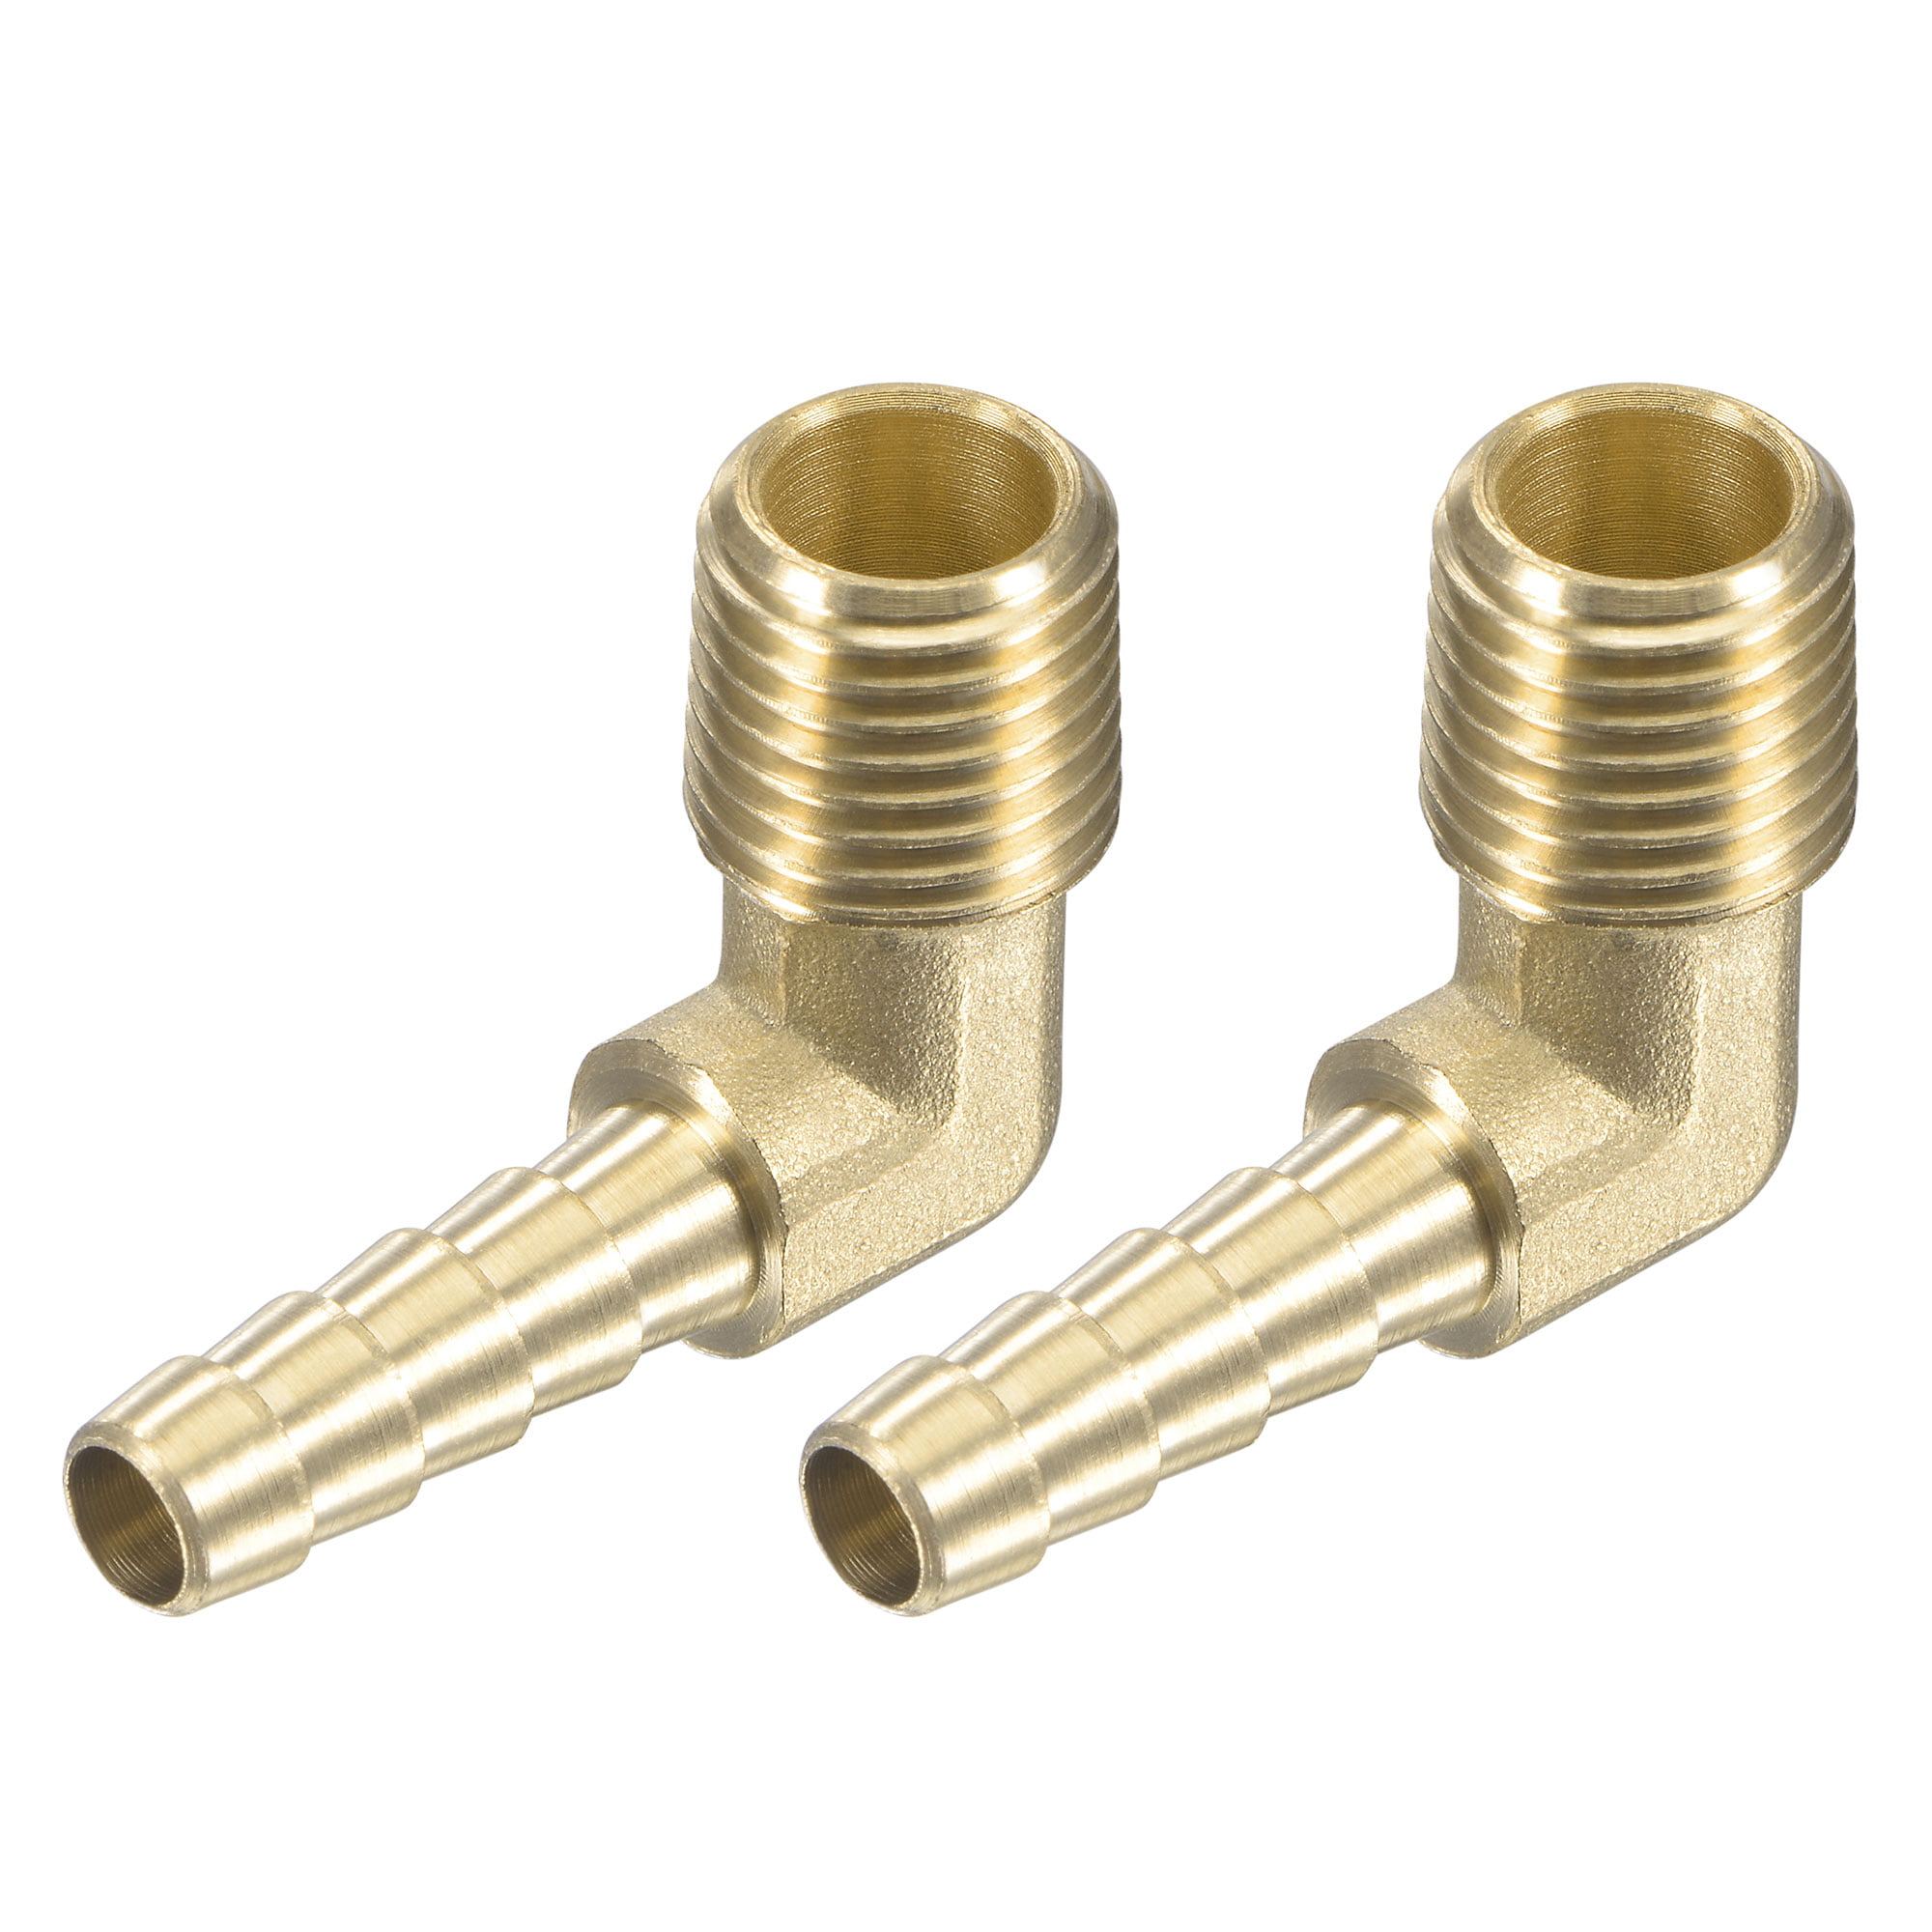 3/4" Male Brass Hose Barbs Barb To 1/2" NPT Pipe Male Thread